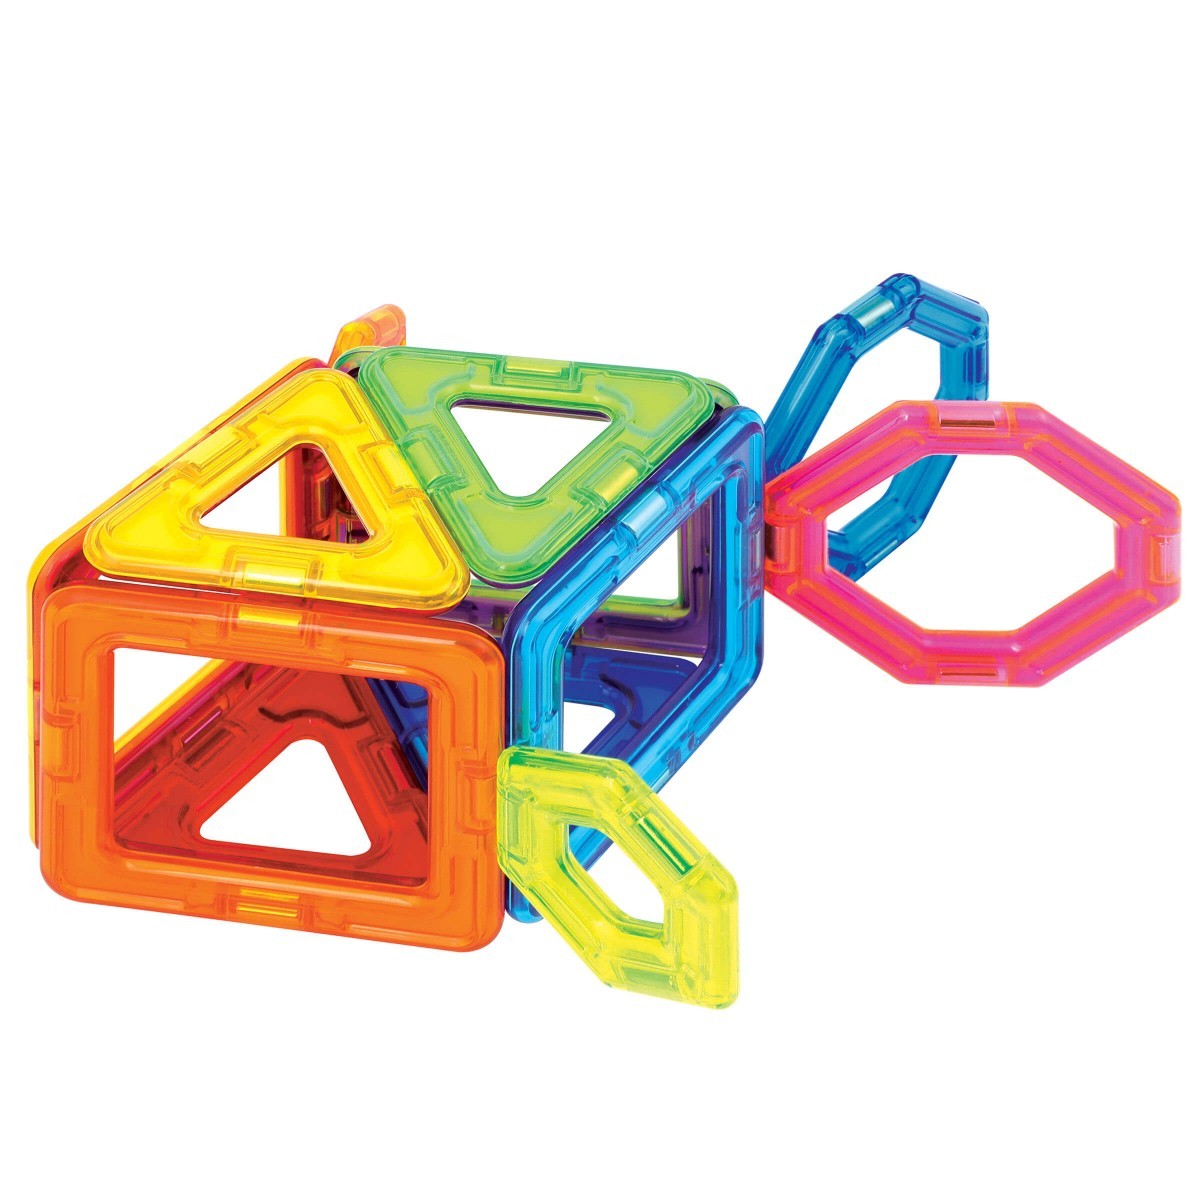 Magformers Challenge 14 Piece Advanced Magnetic Construction Set at Toys R  Us UK